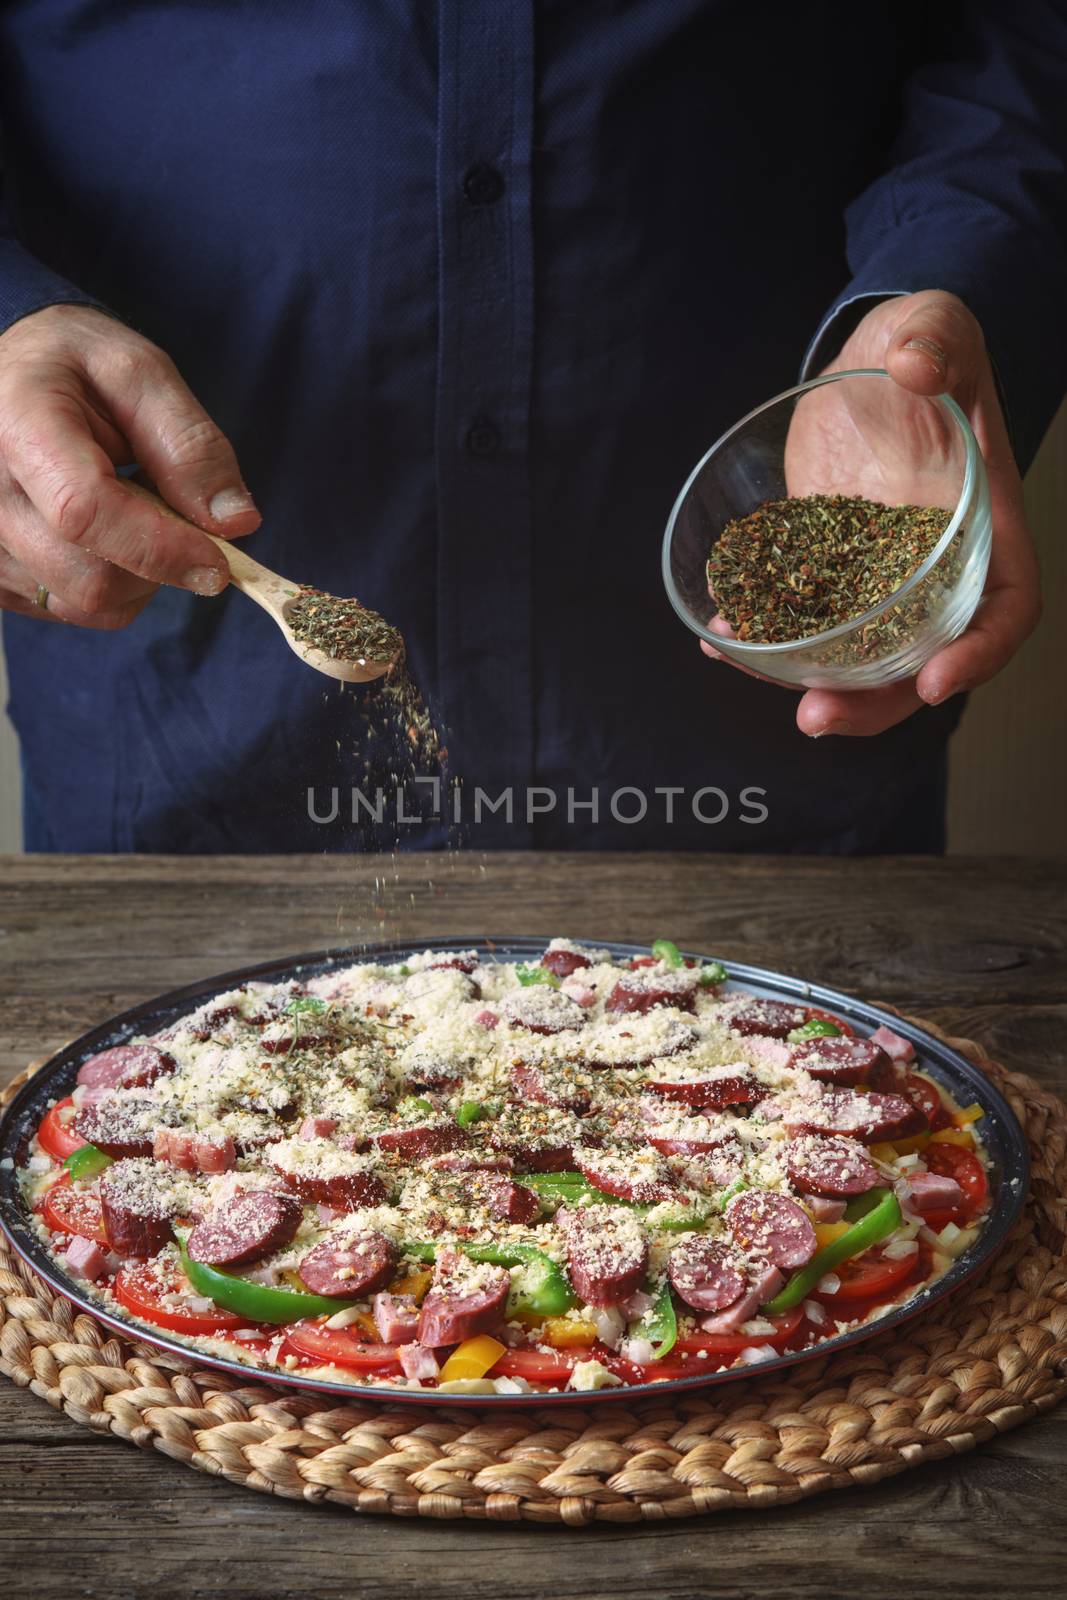 Man sprinkle with spice pizza from a glass sauser vertical